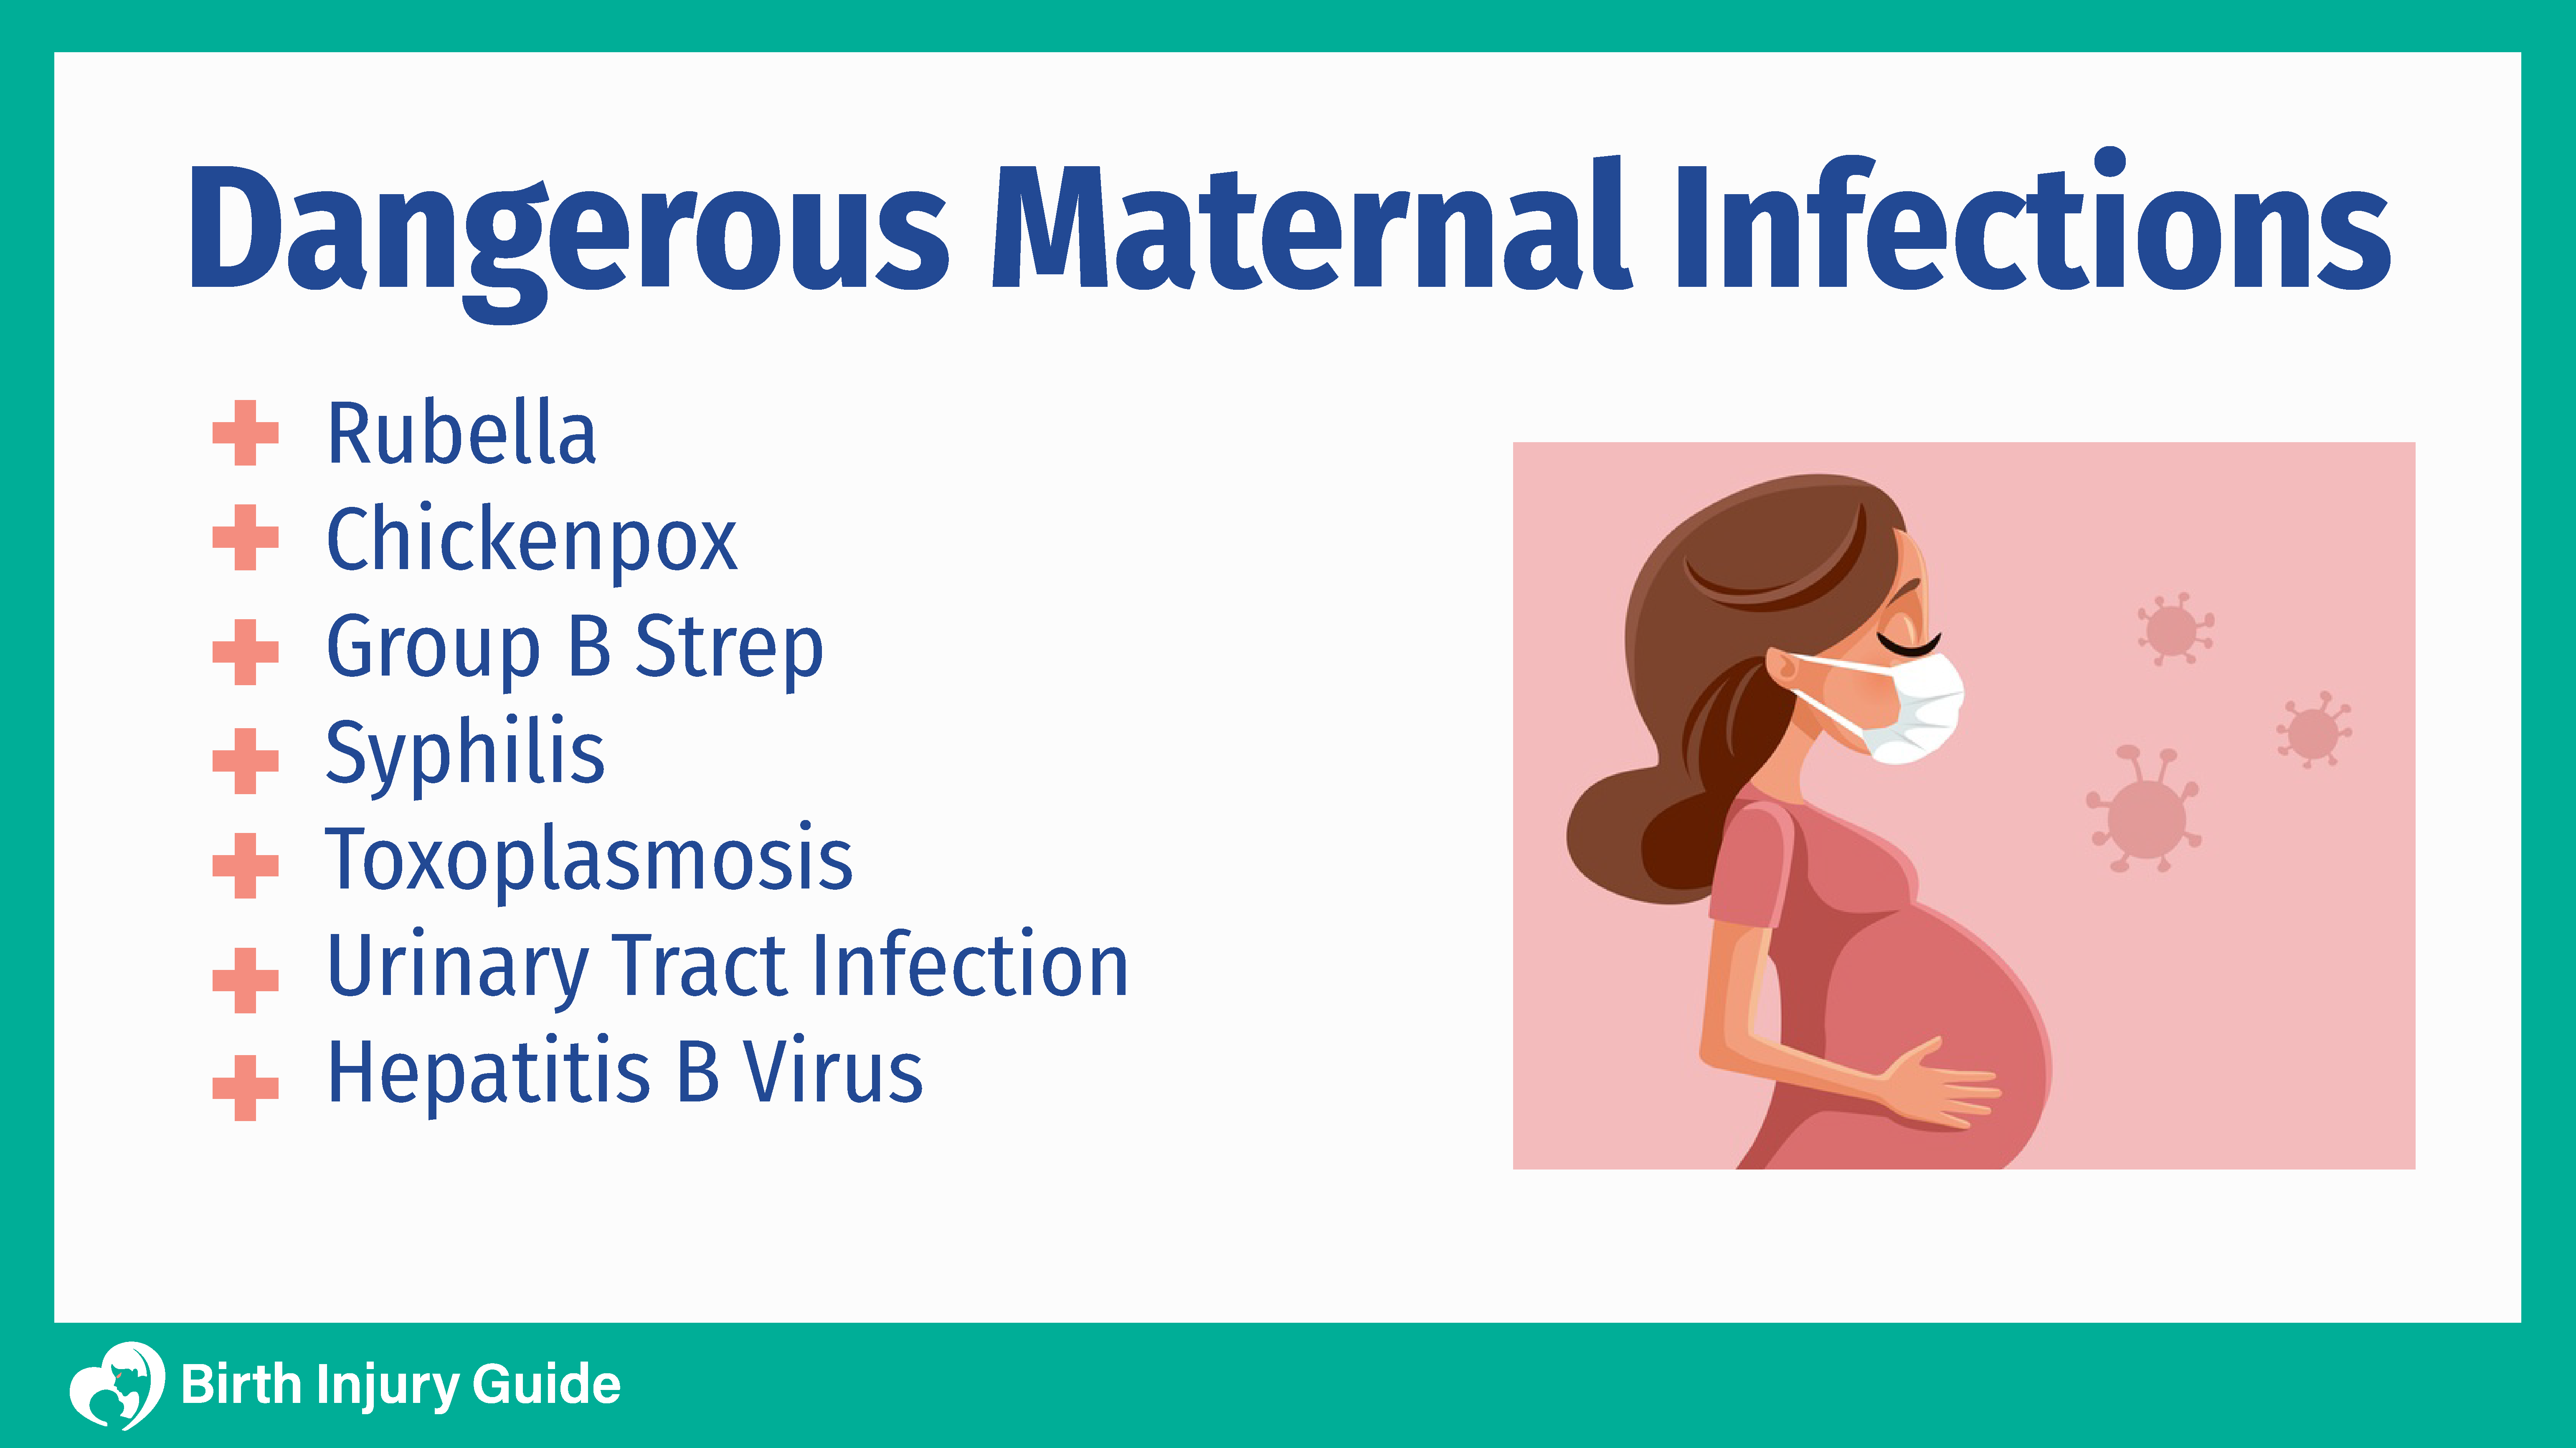 maternal infections